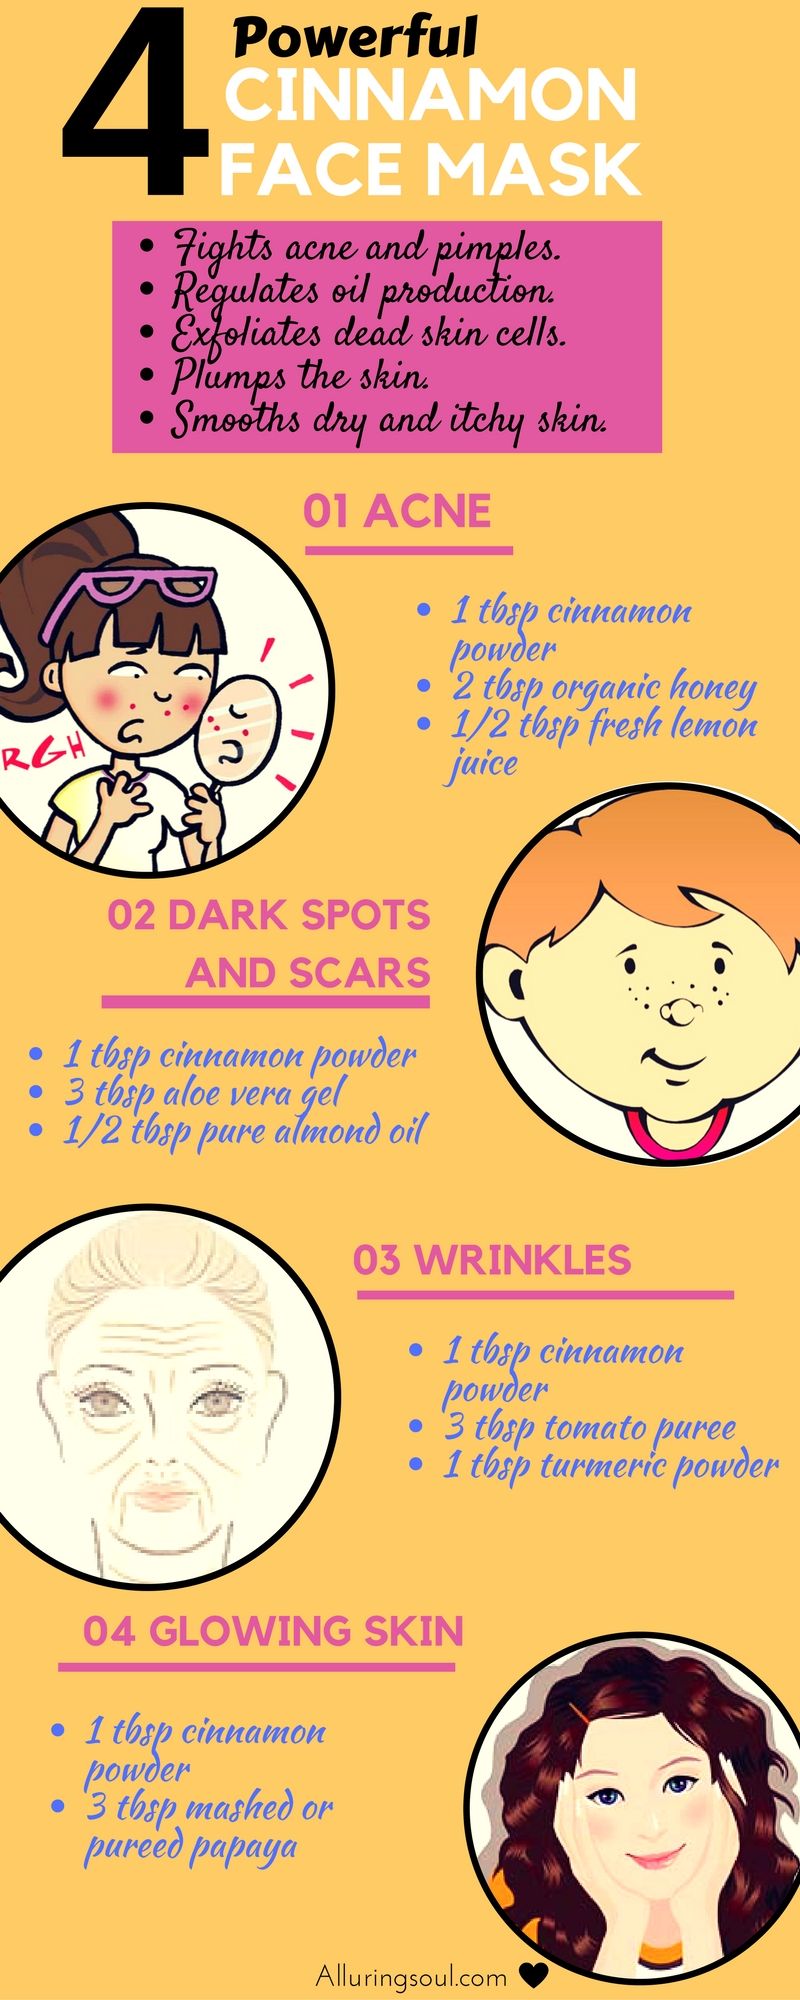 cinnamon face mask infographic